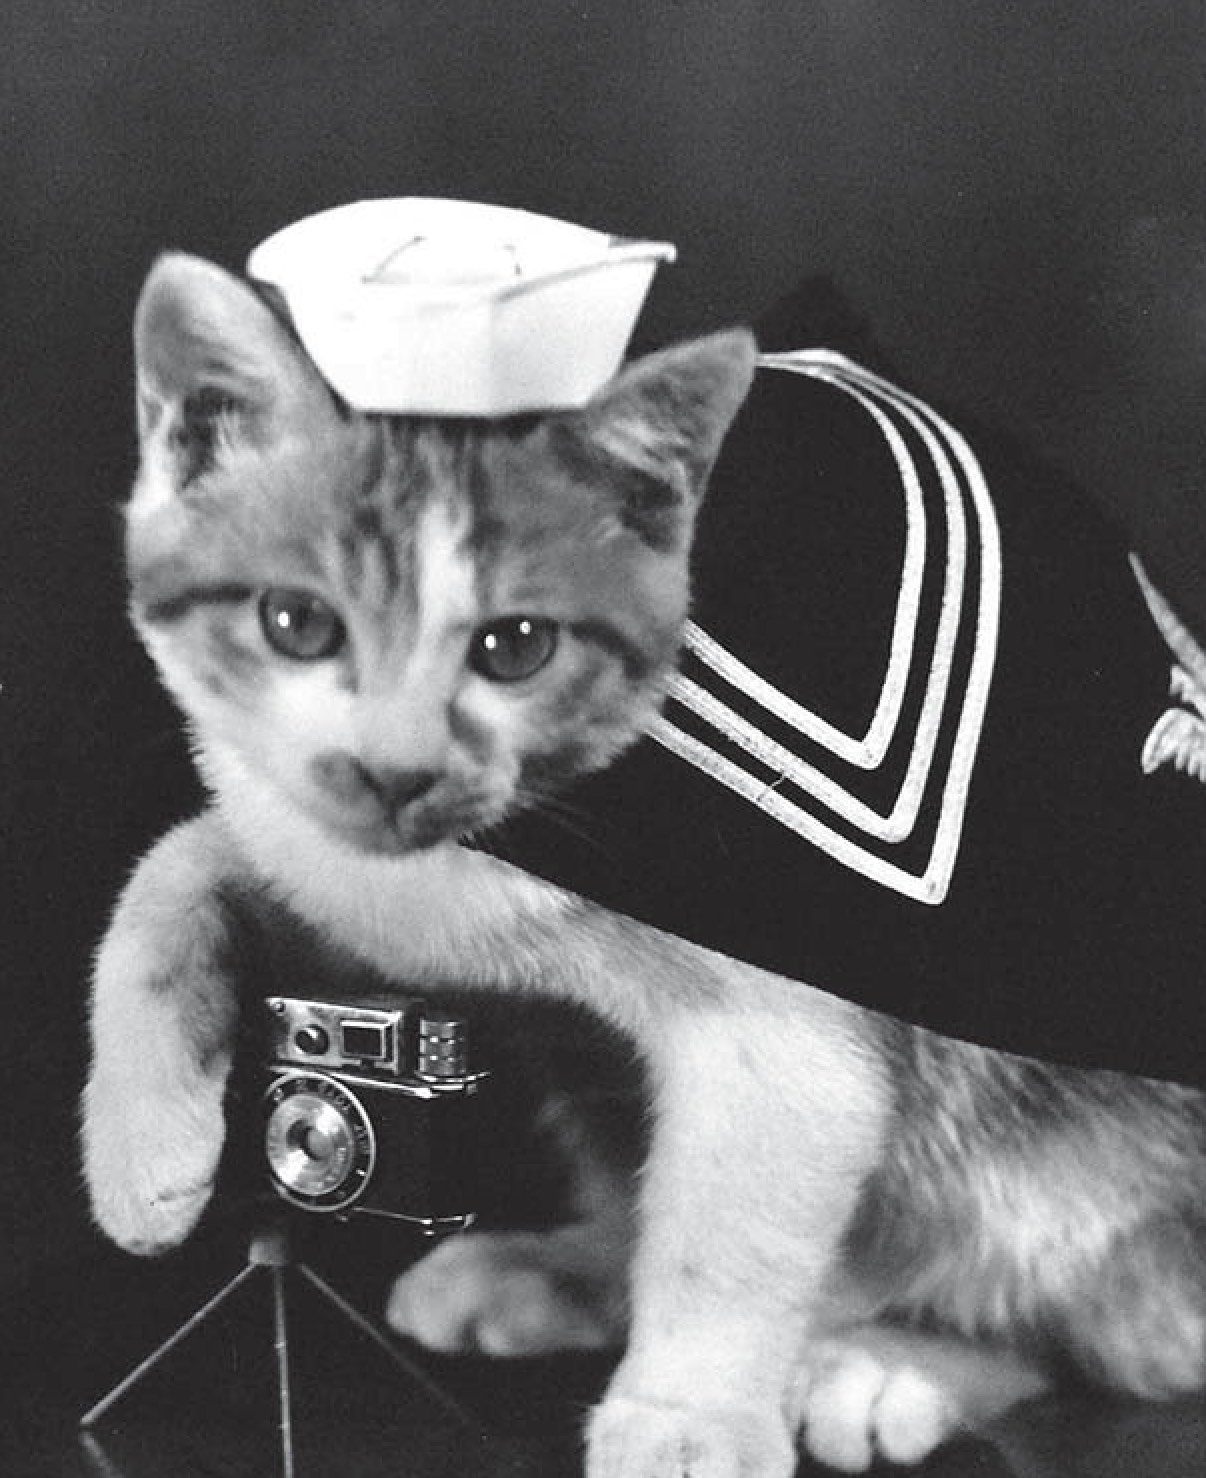 Cats in the Navy: Book Explores the Secret Life of Sea Cats